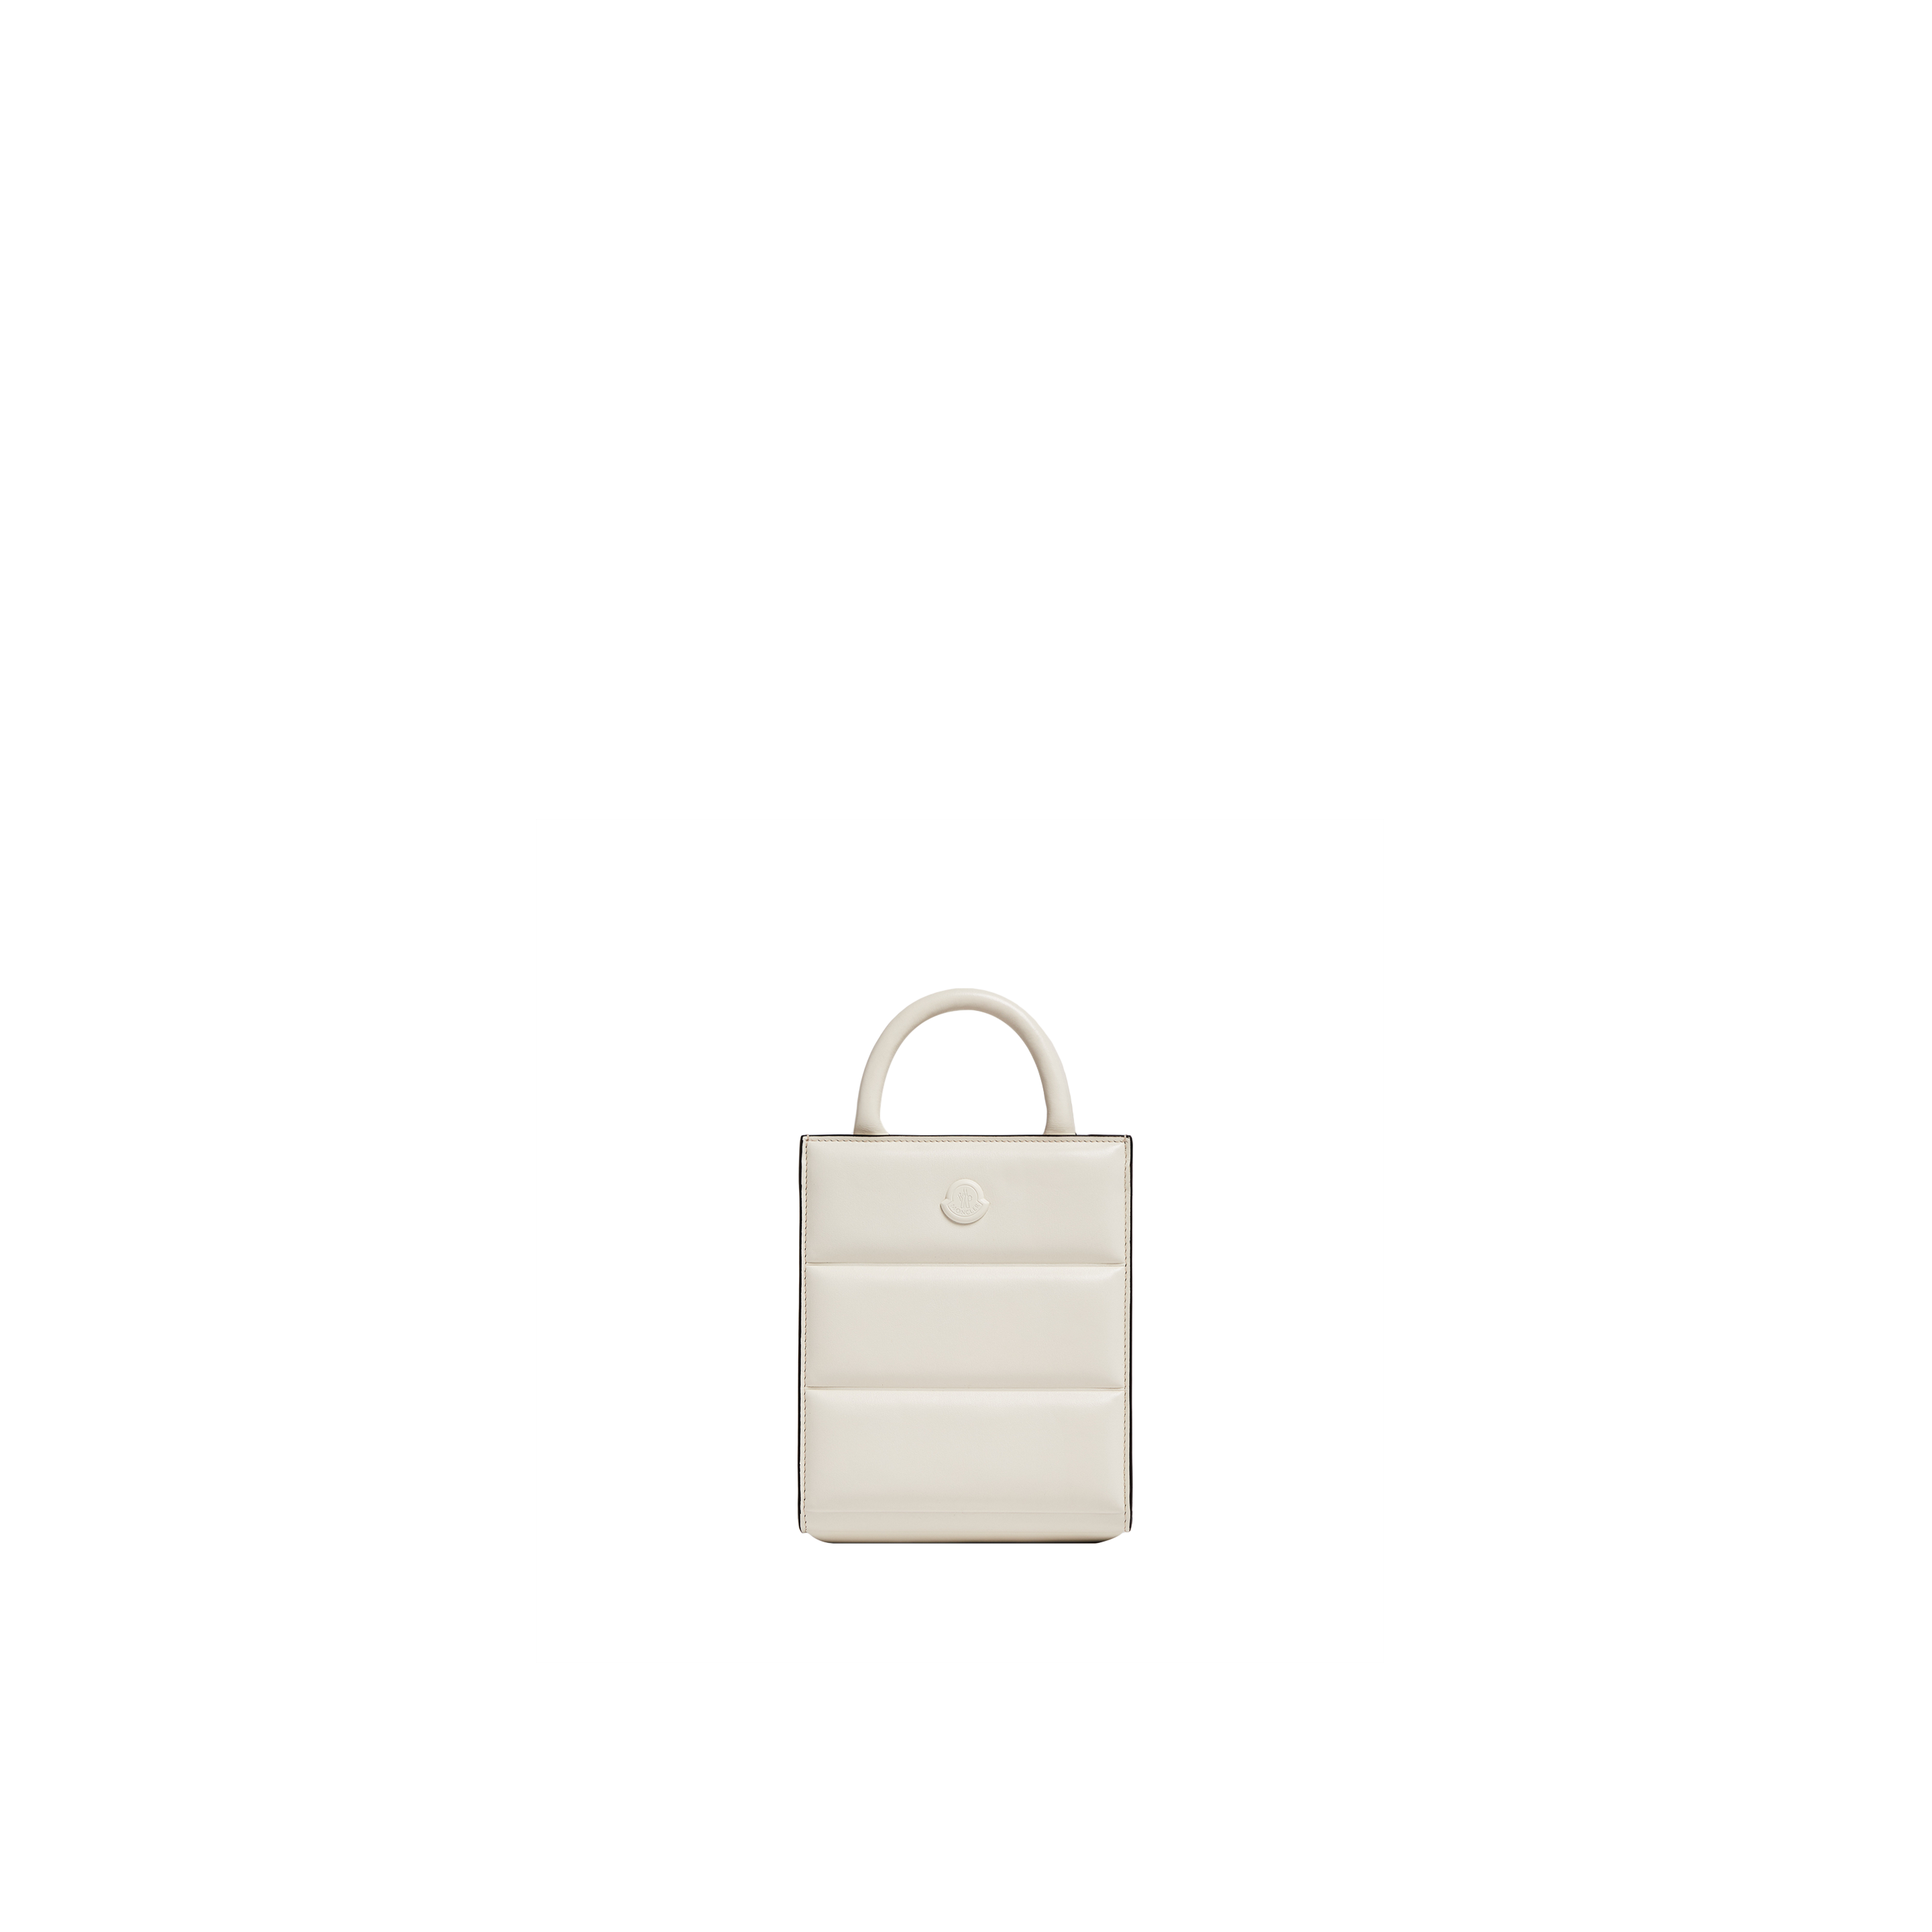 Moncler Collection Doudoune Leather Mini Tote Bag, White, Size: One Size